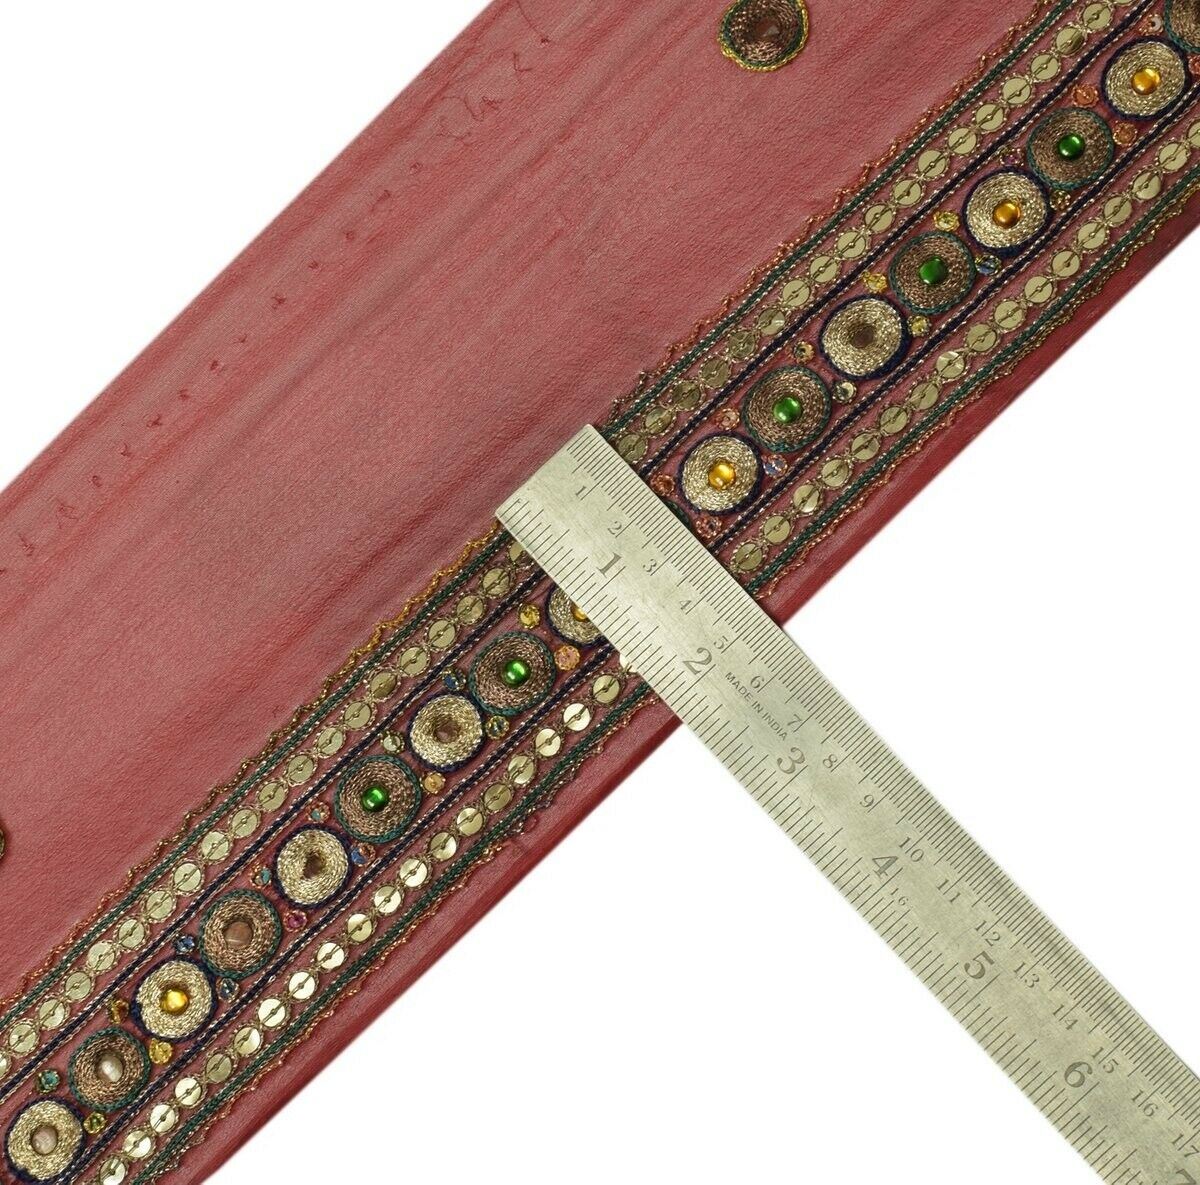 2" W Vintage Sari Border Indian Craft Trim Embroidered Maroon Sewing Ribbon Lace